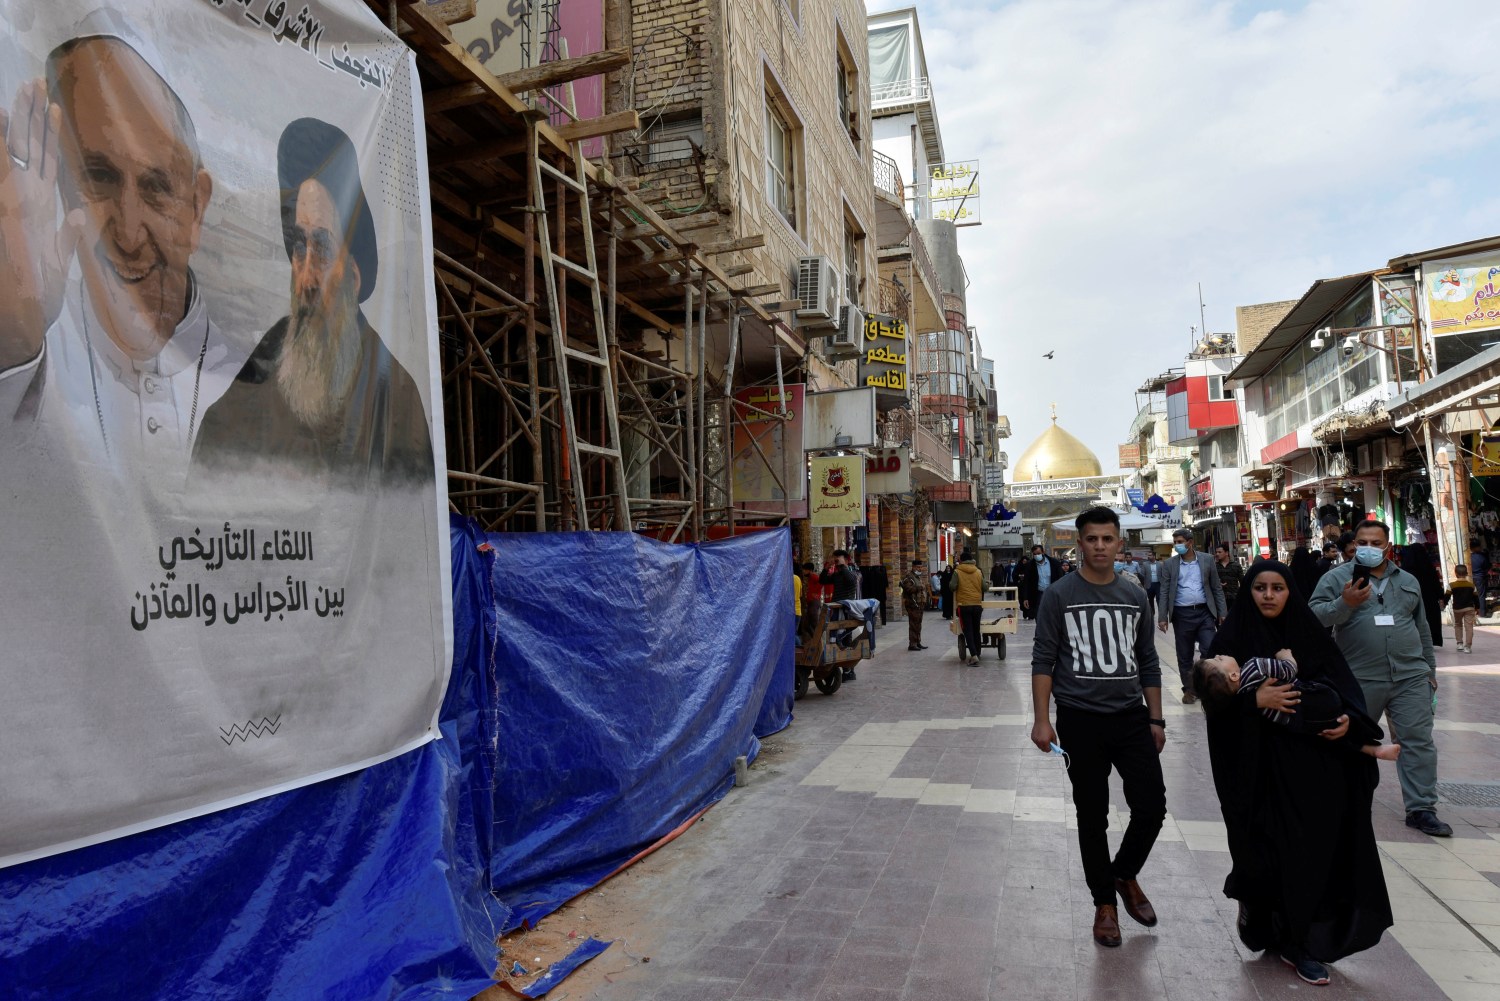 People walk past a poster of Pope Francis and Iraq's top Shi'ite cleric, Ayatollah Ali al-Sistani, ahead of the Pope's planned visit to Iraq, in Najaf, Iraq, March 4, 2021. REUTERS/ Alaa Al-Marjani